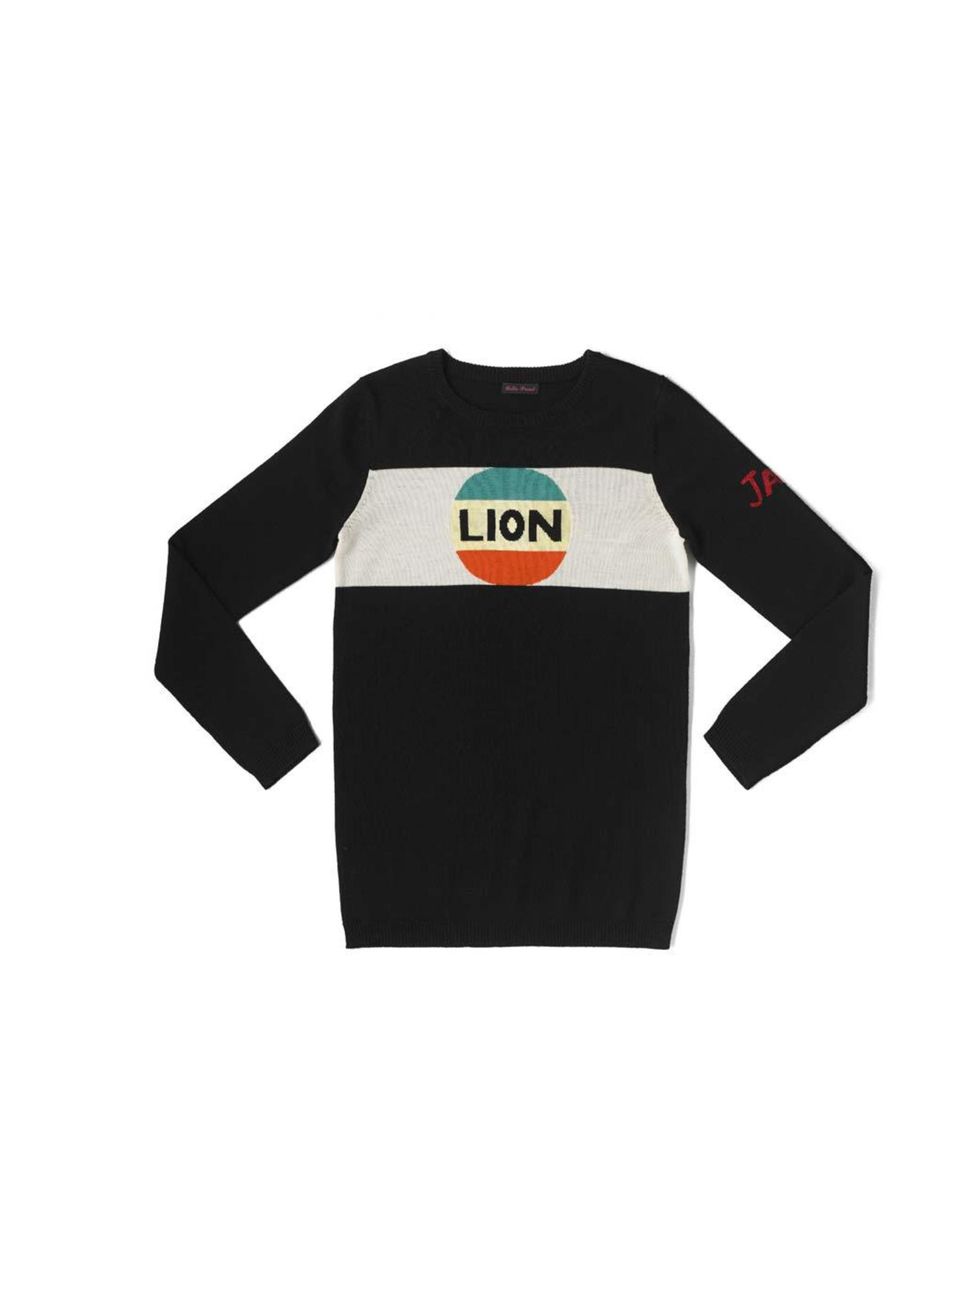 <p>The undisputed queen of cult cool logo knits. Bella Freud, £220, <a href="http://www.bellafreud.co.uk/shop/collections/aw13/lion-stripe/">bellafreud.co.uk</a></p>